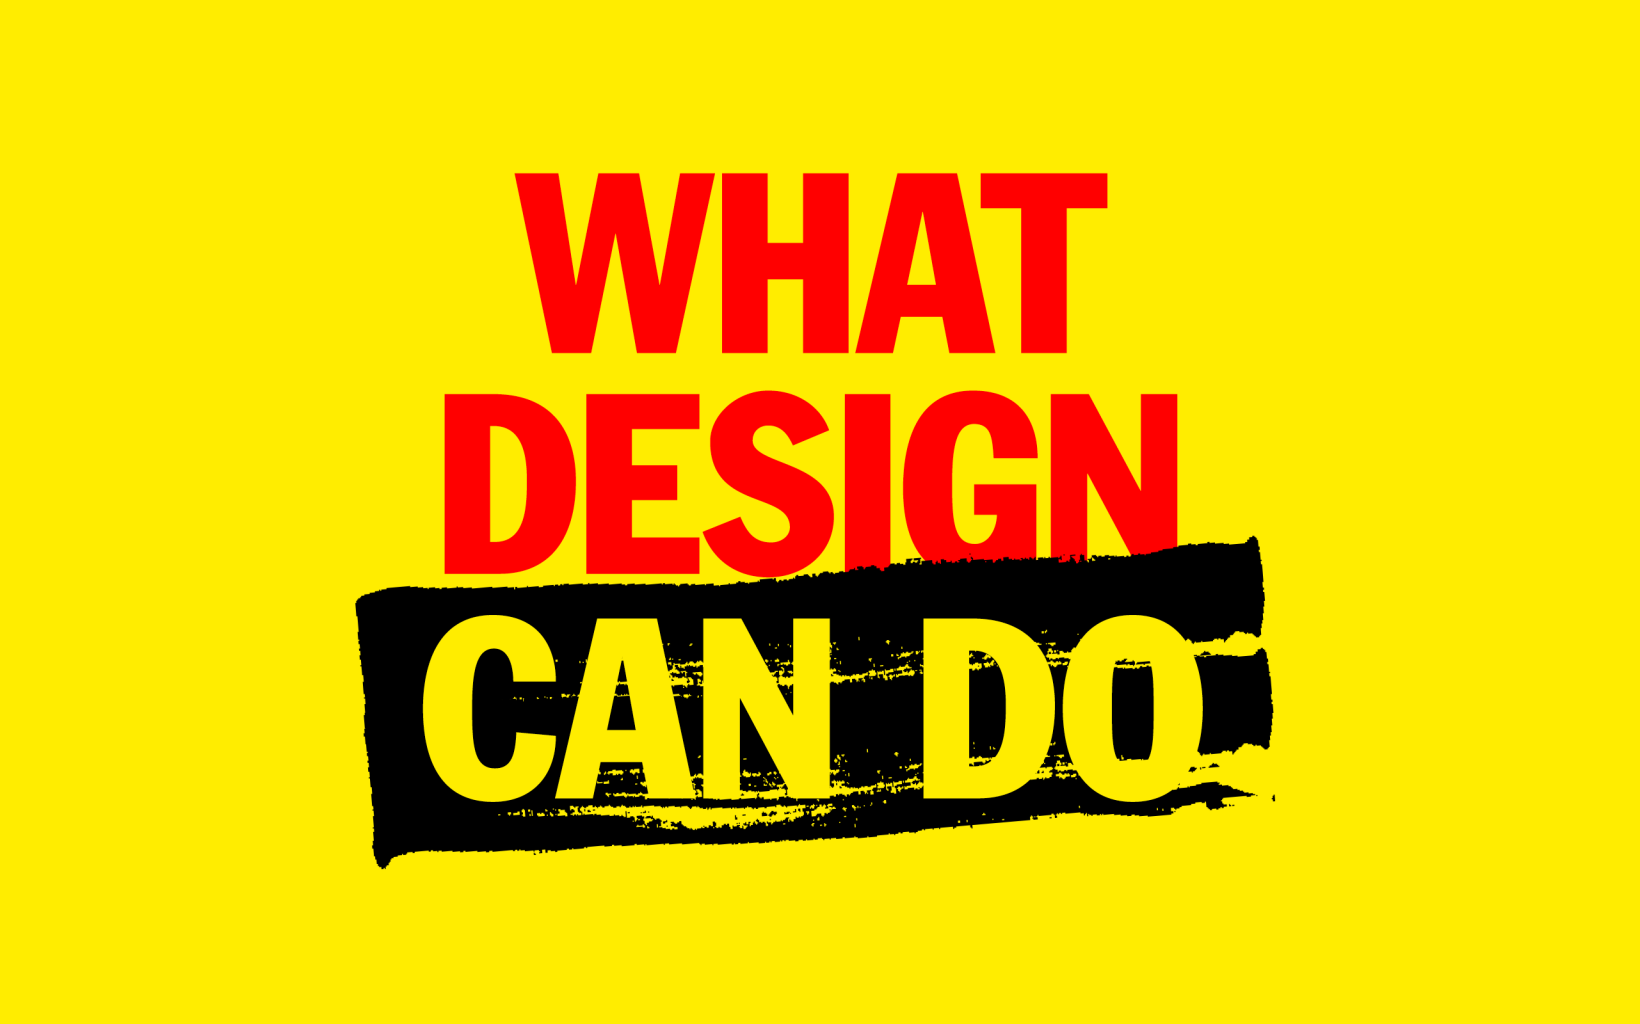 About What Design Can Do